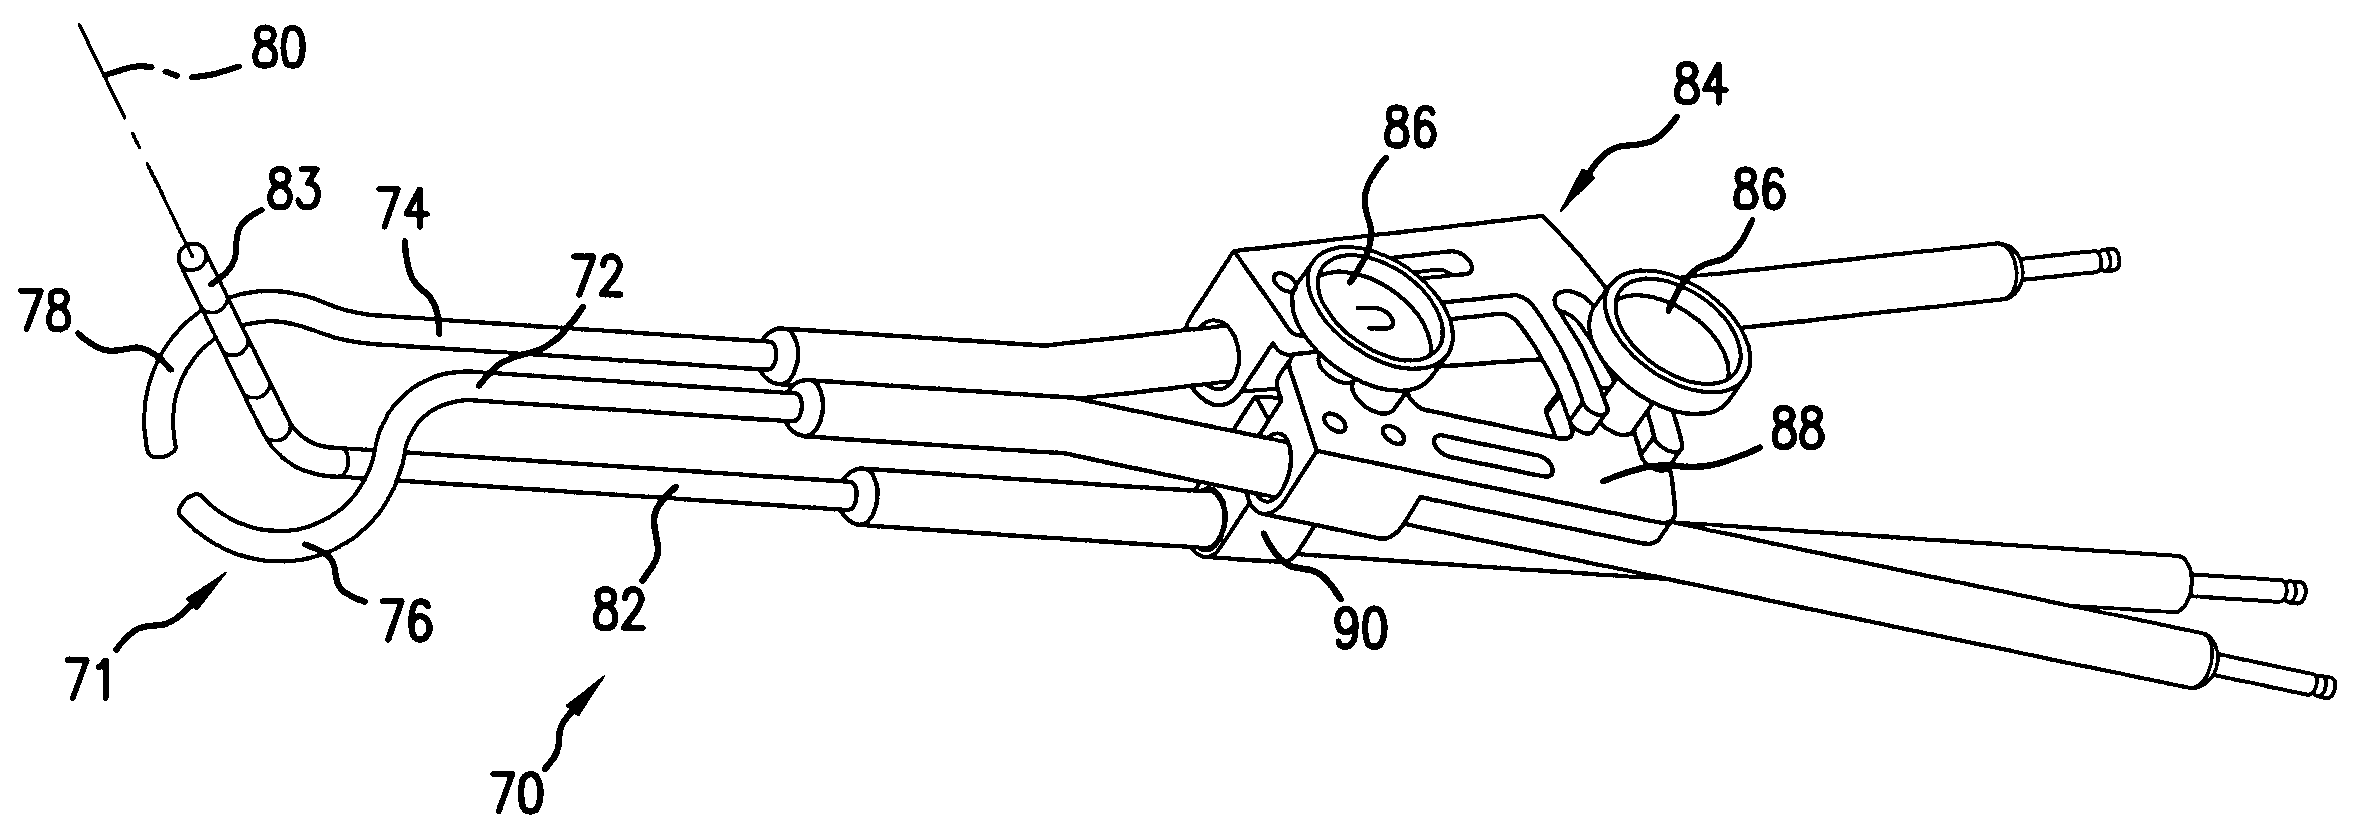 Split-ring brachytherapy device and method for cervical brachytherapy treatment using a split-ring brachytherapy device